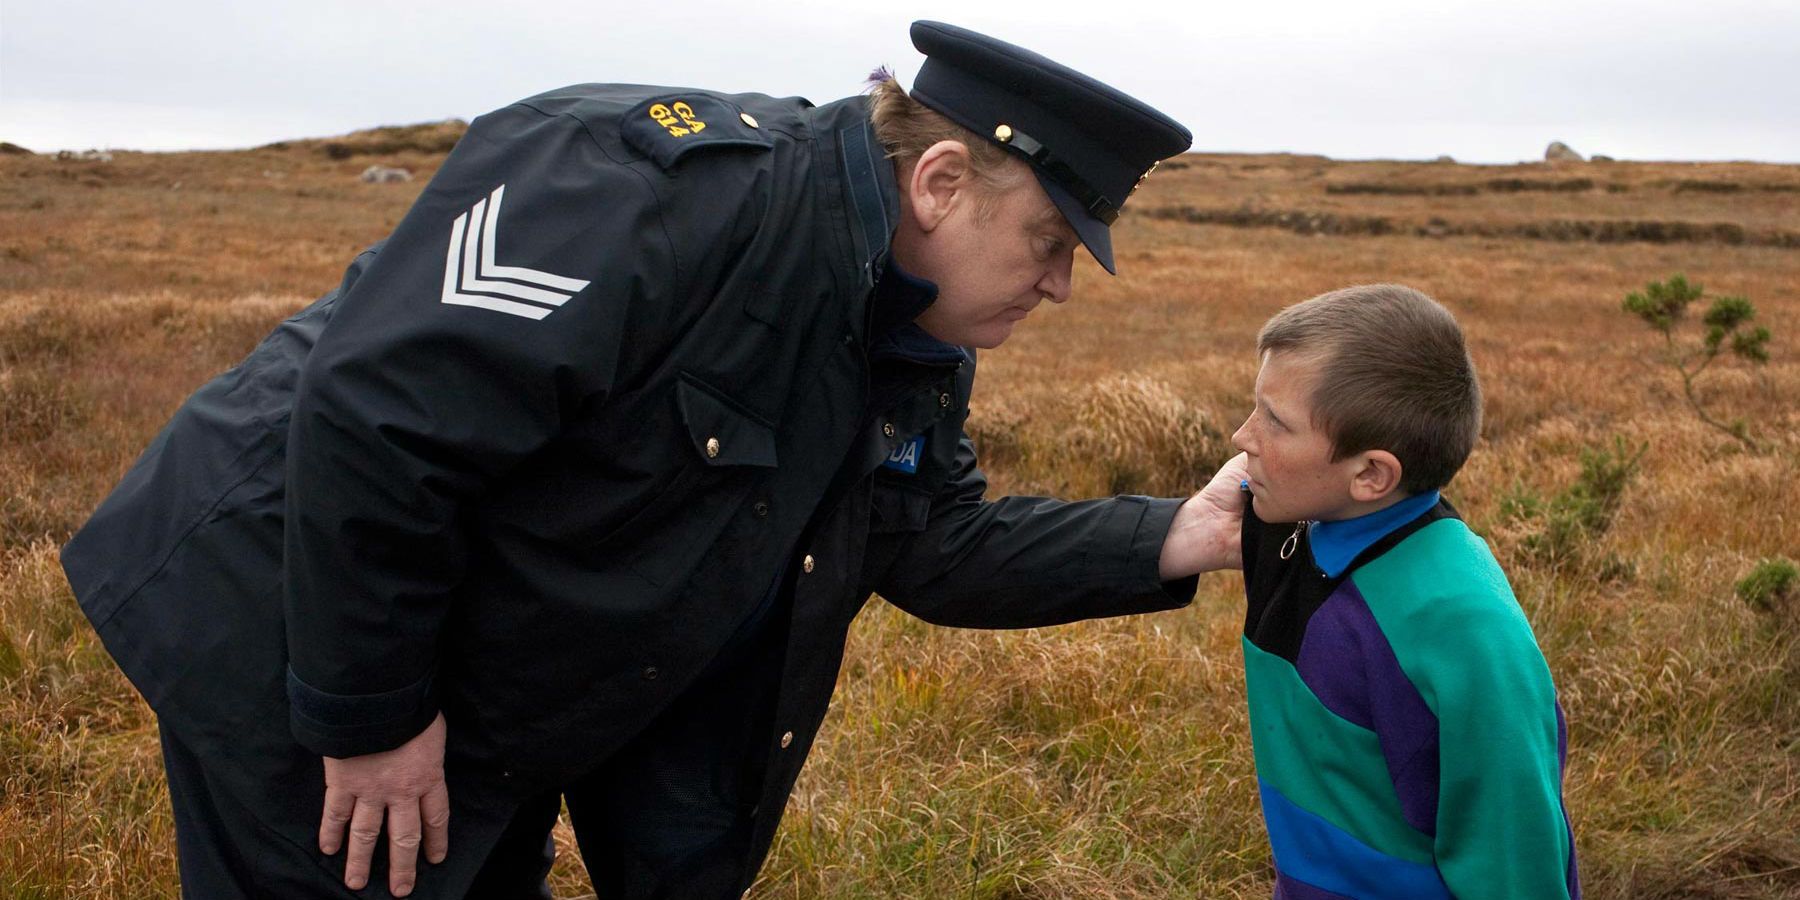 Brendan Gleeson as a police officer holding a boy by the collar in The Guard.